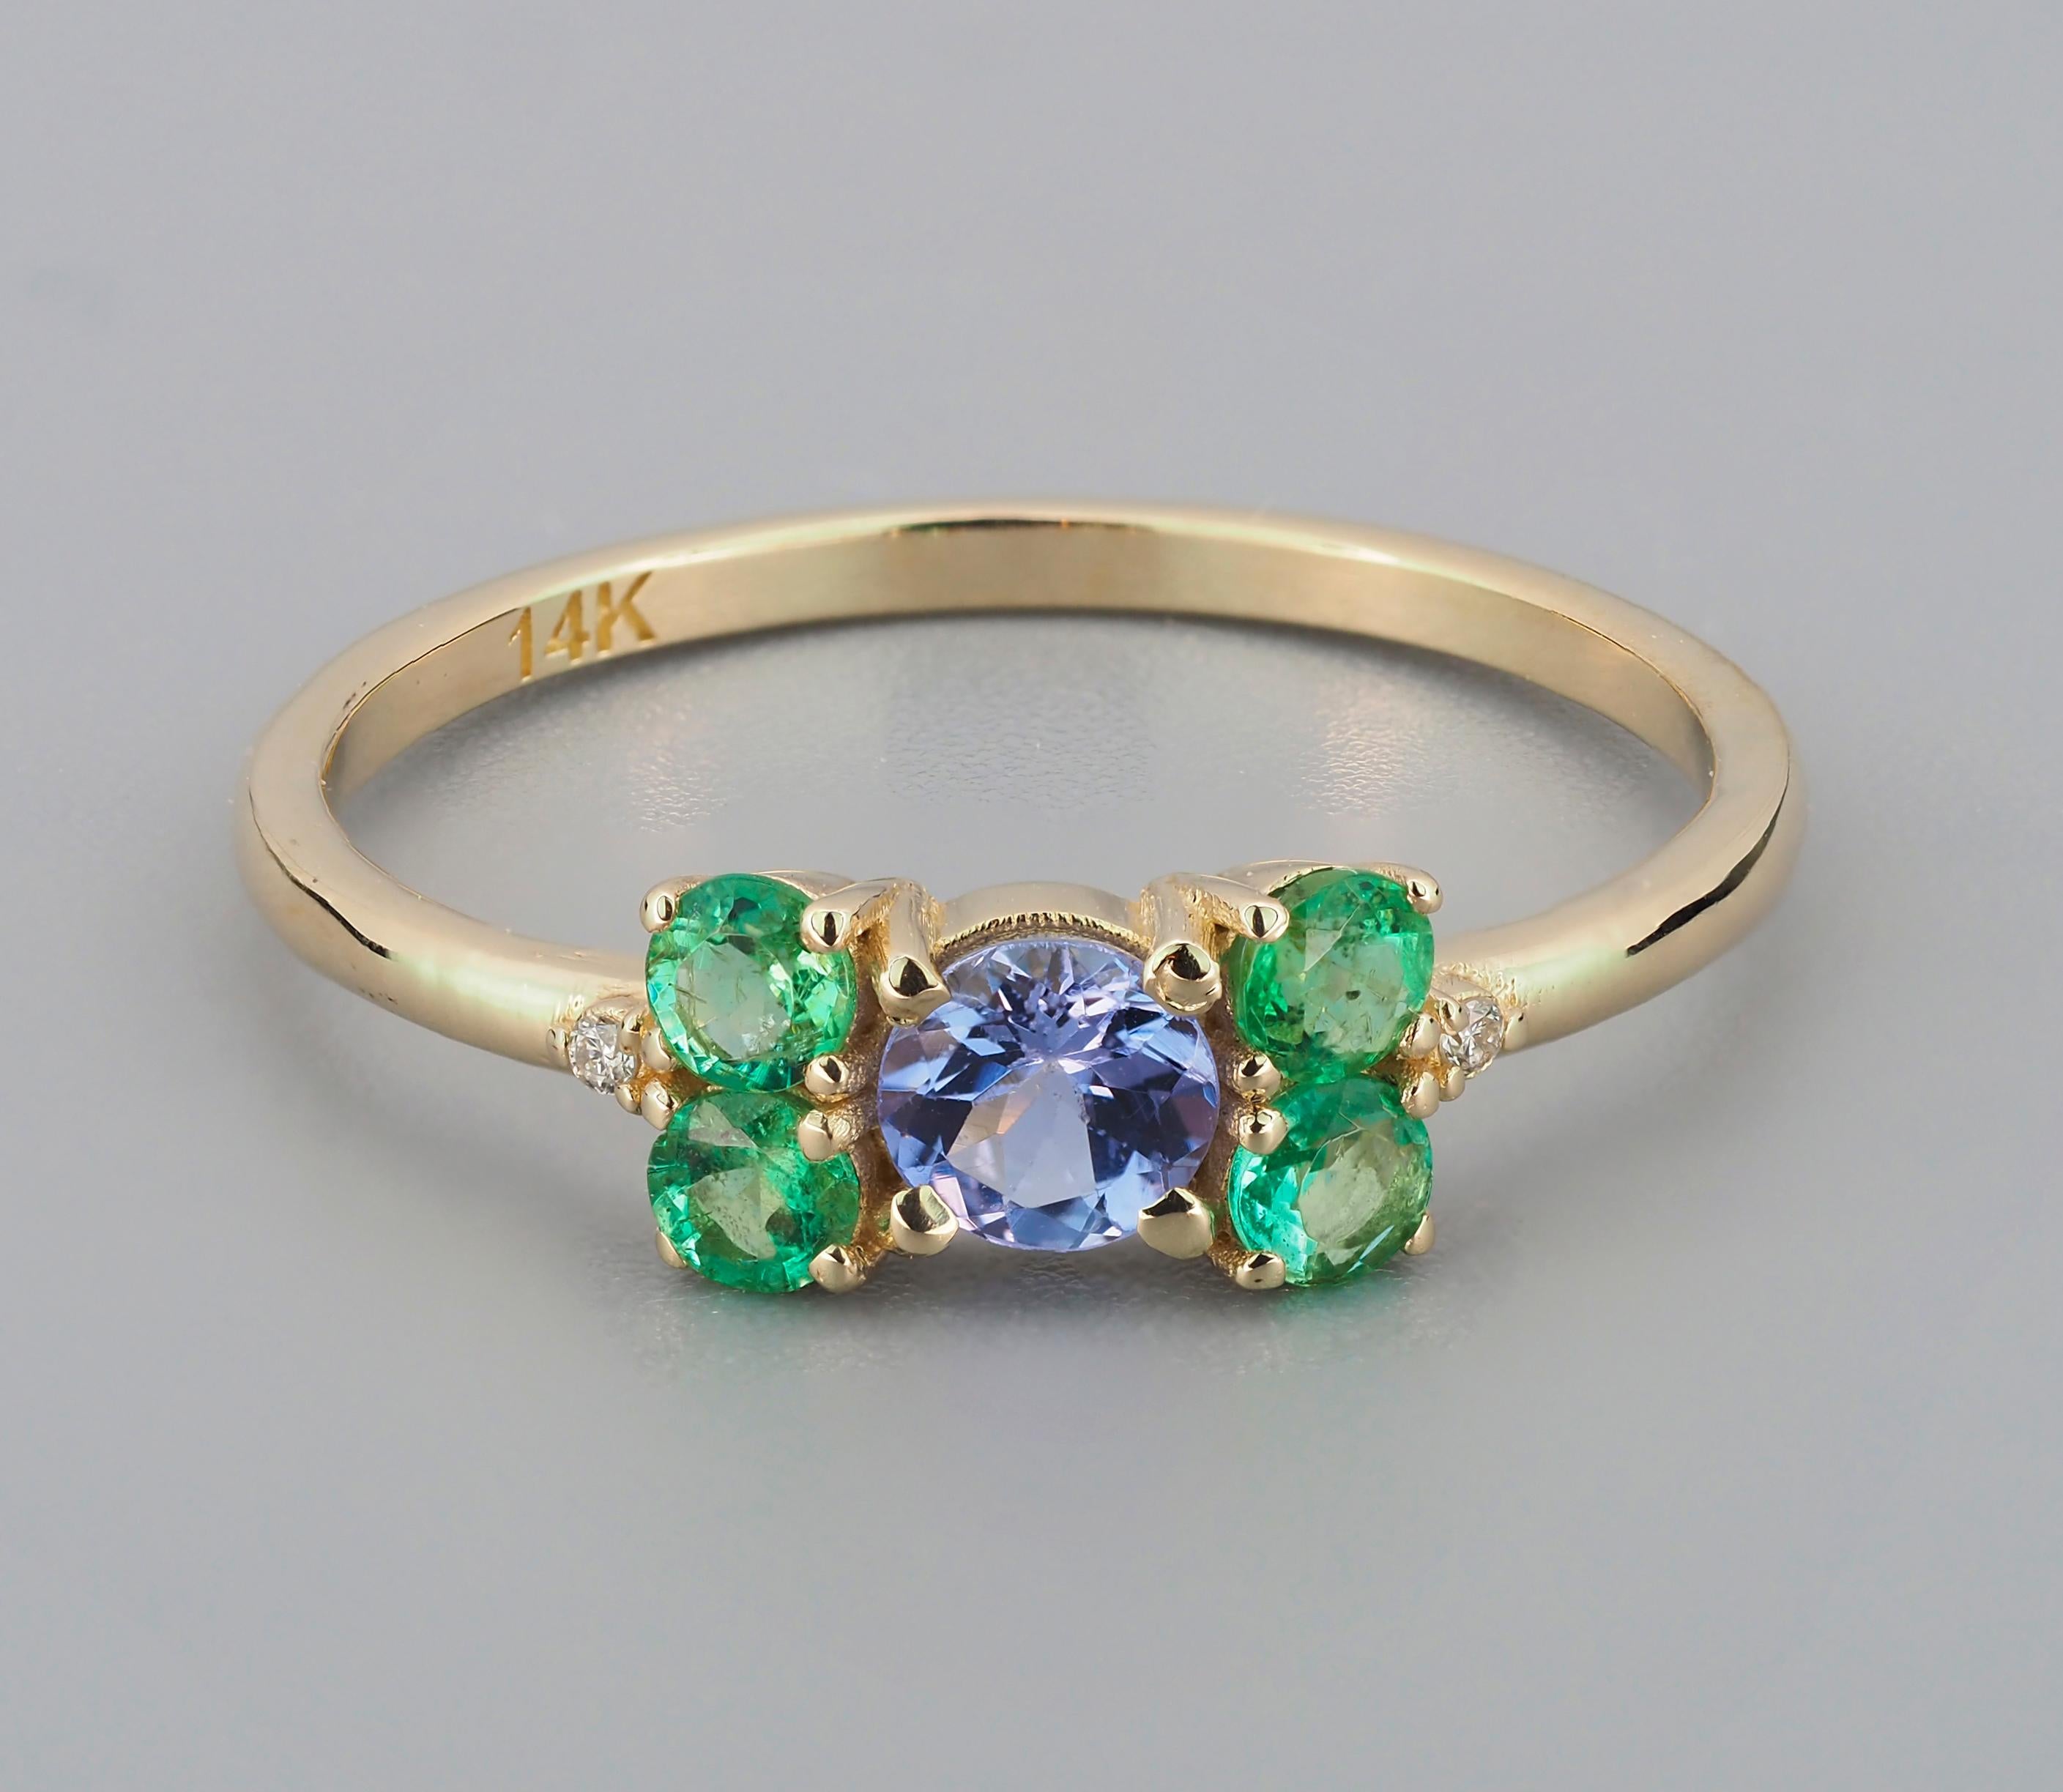 Tanzanite and emeralds 14k gold ring. Round tanzanite gold ring. Tanzanite gold ring. 

Metal: 14k solid gold.
Weight: 1.8 (depends from size).
Set with tanzanite, color - light blue
round cut, aprox 0.45 ct
Clarity: Transparent with